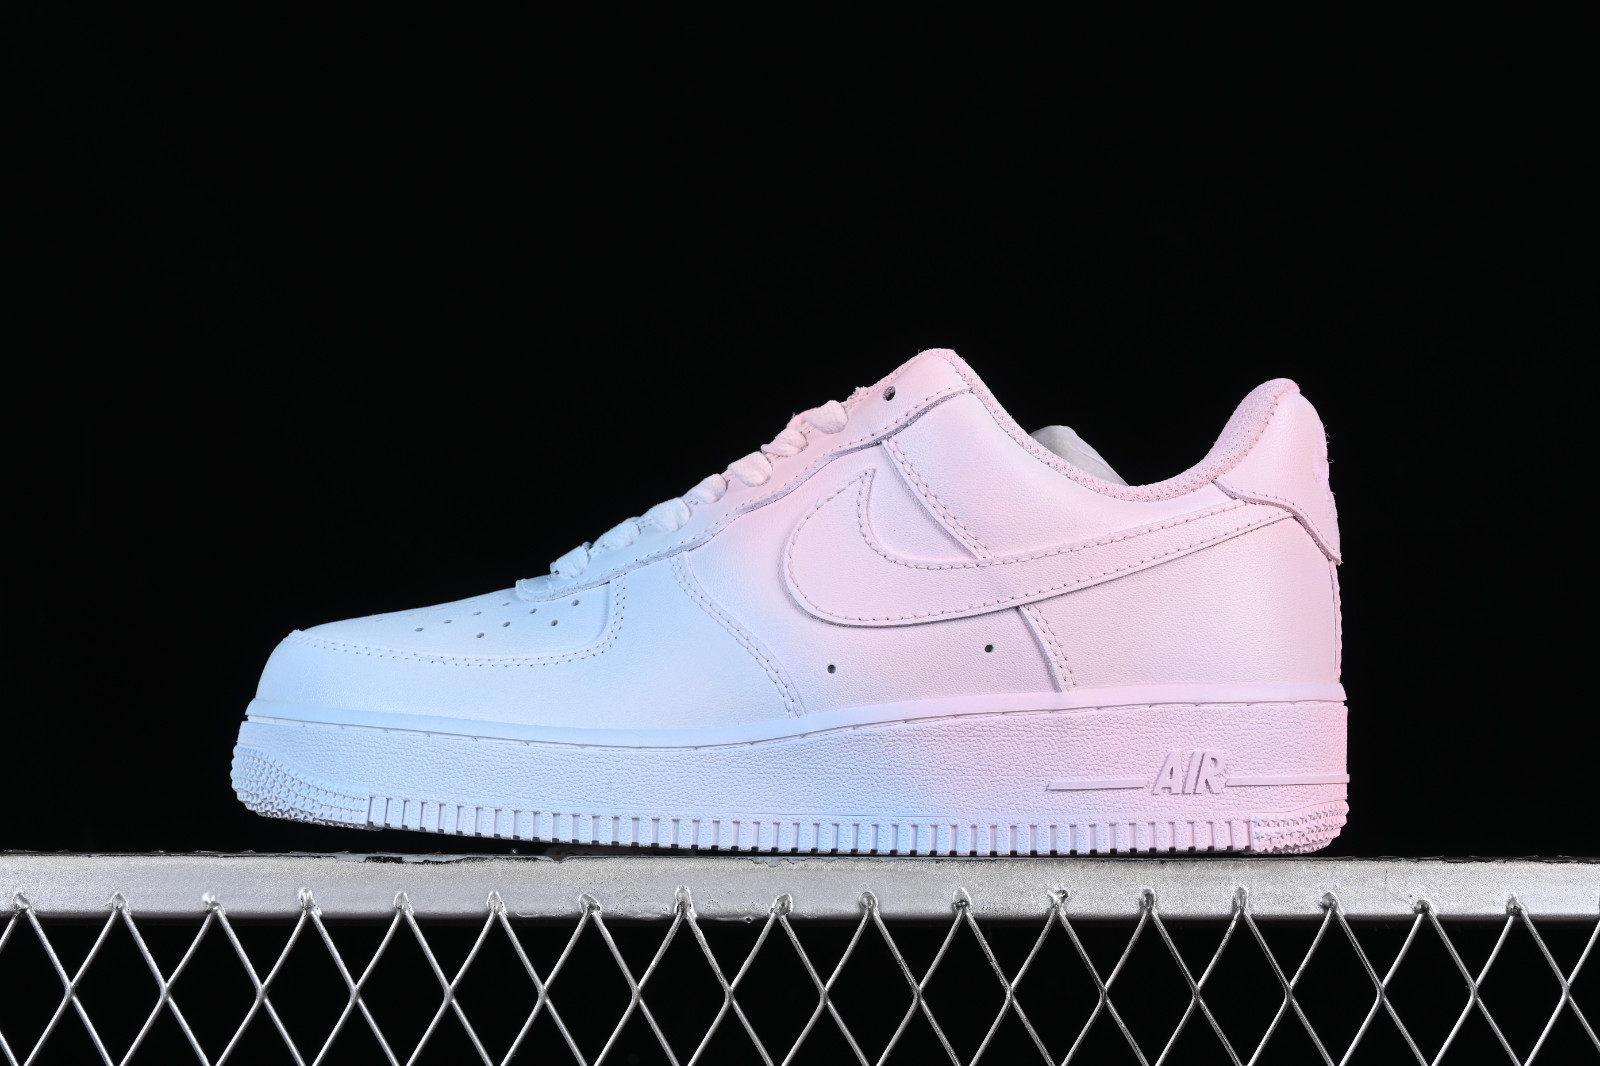 Nike Air Force 1 &07 Men's Casual Shoes